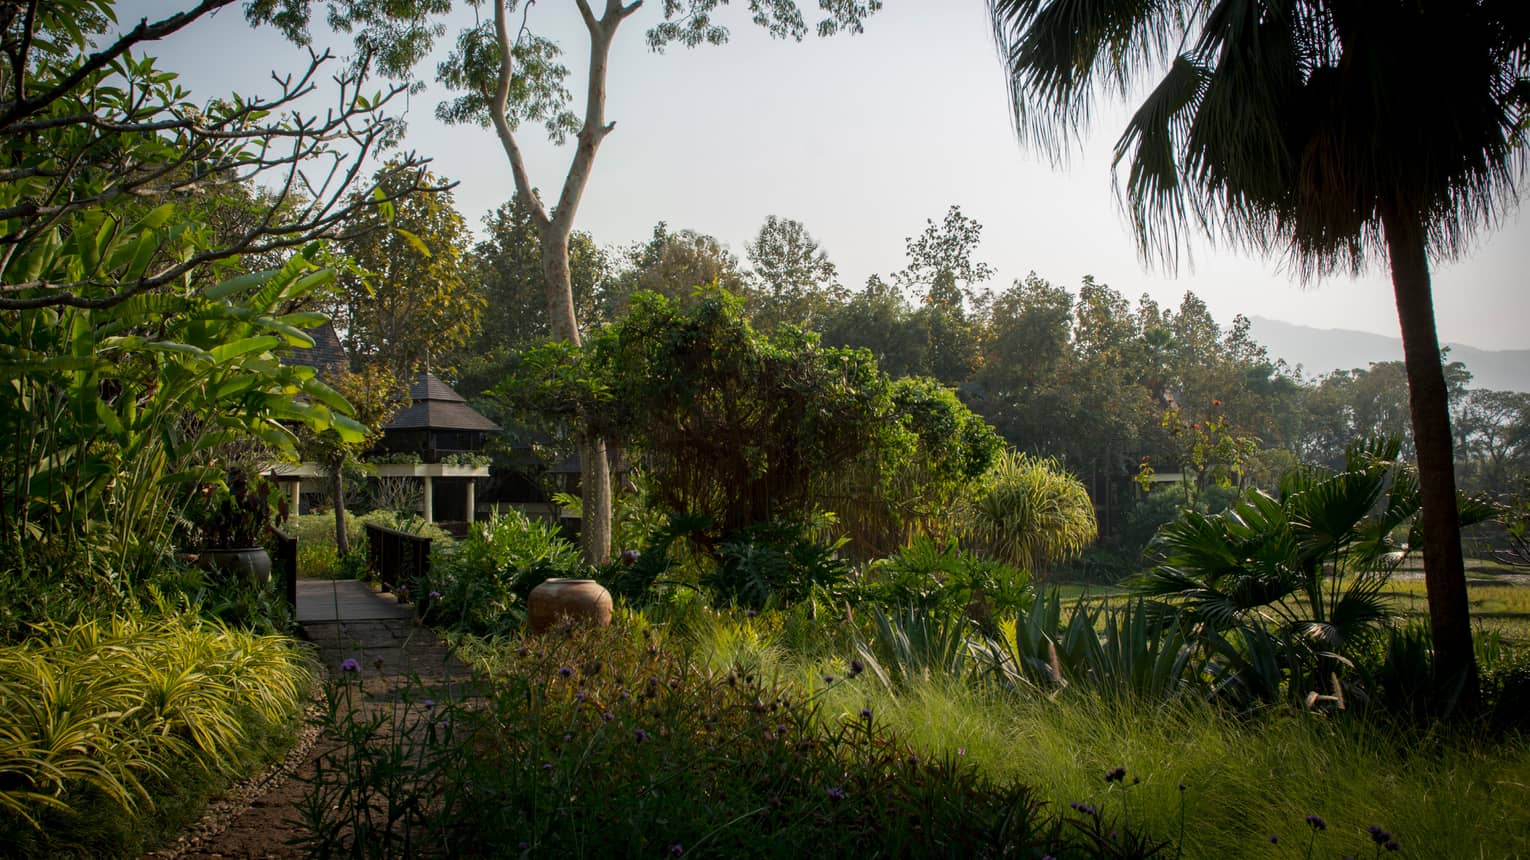 Building visible at end of pathway through tropical gardens, plantation, trees 